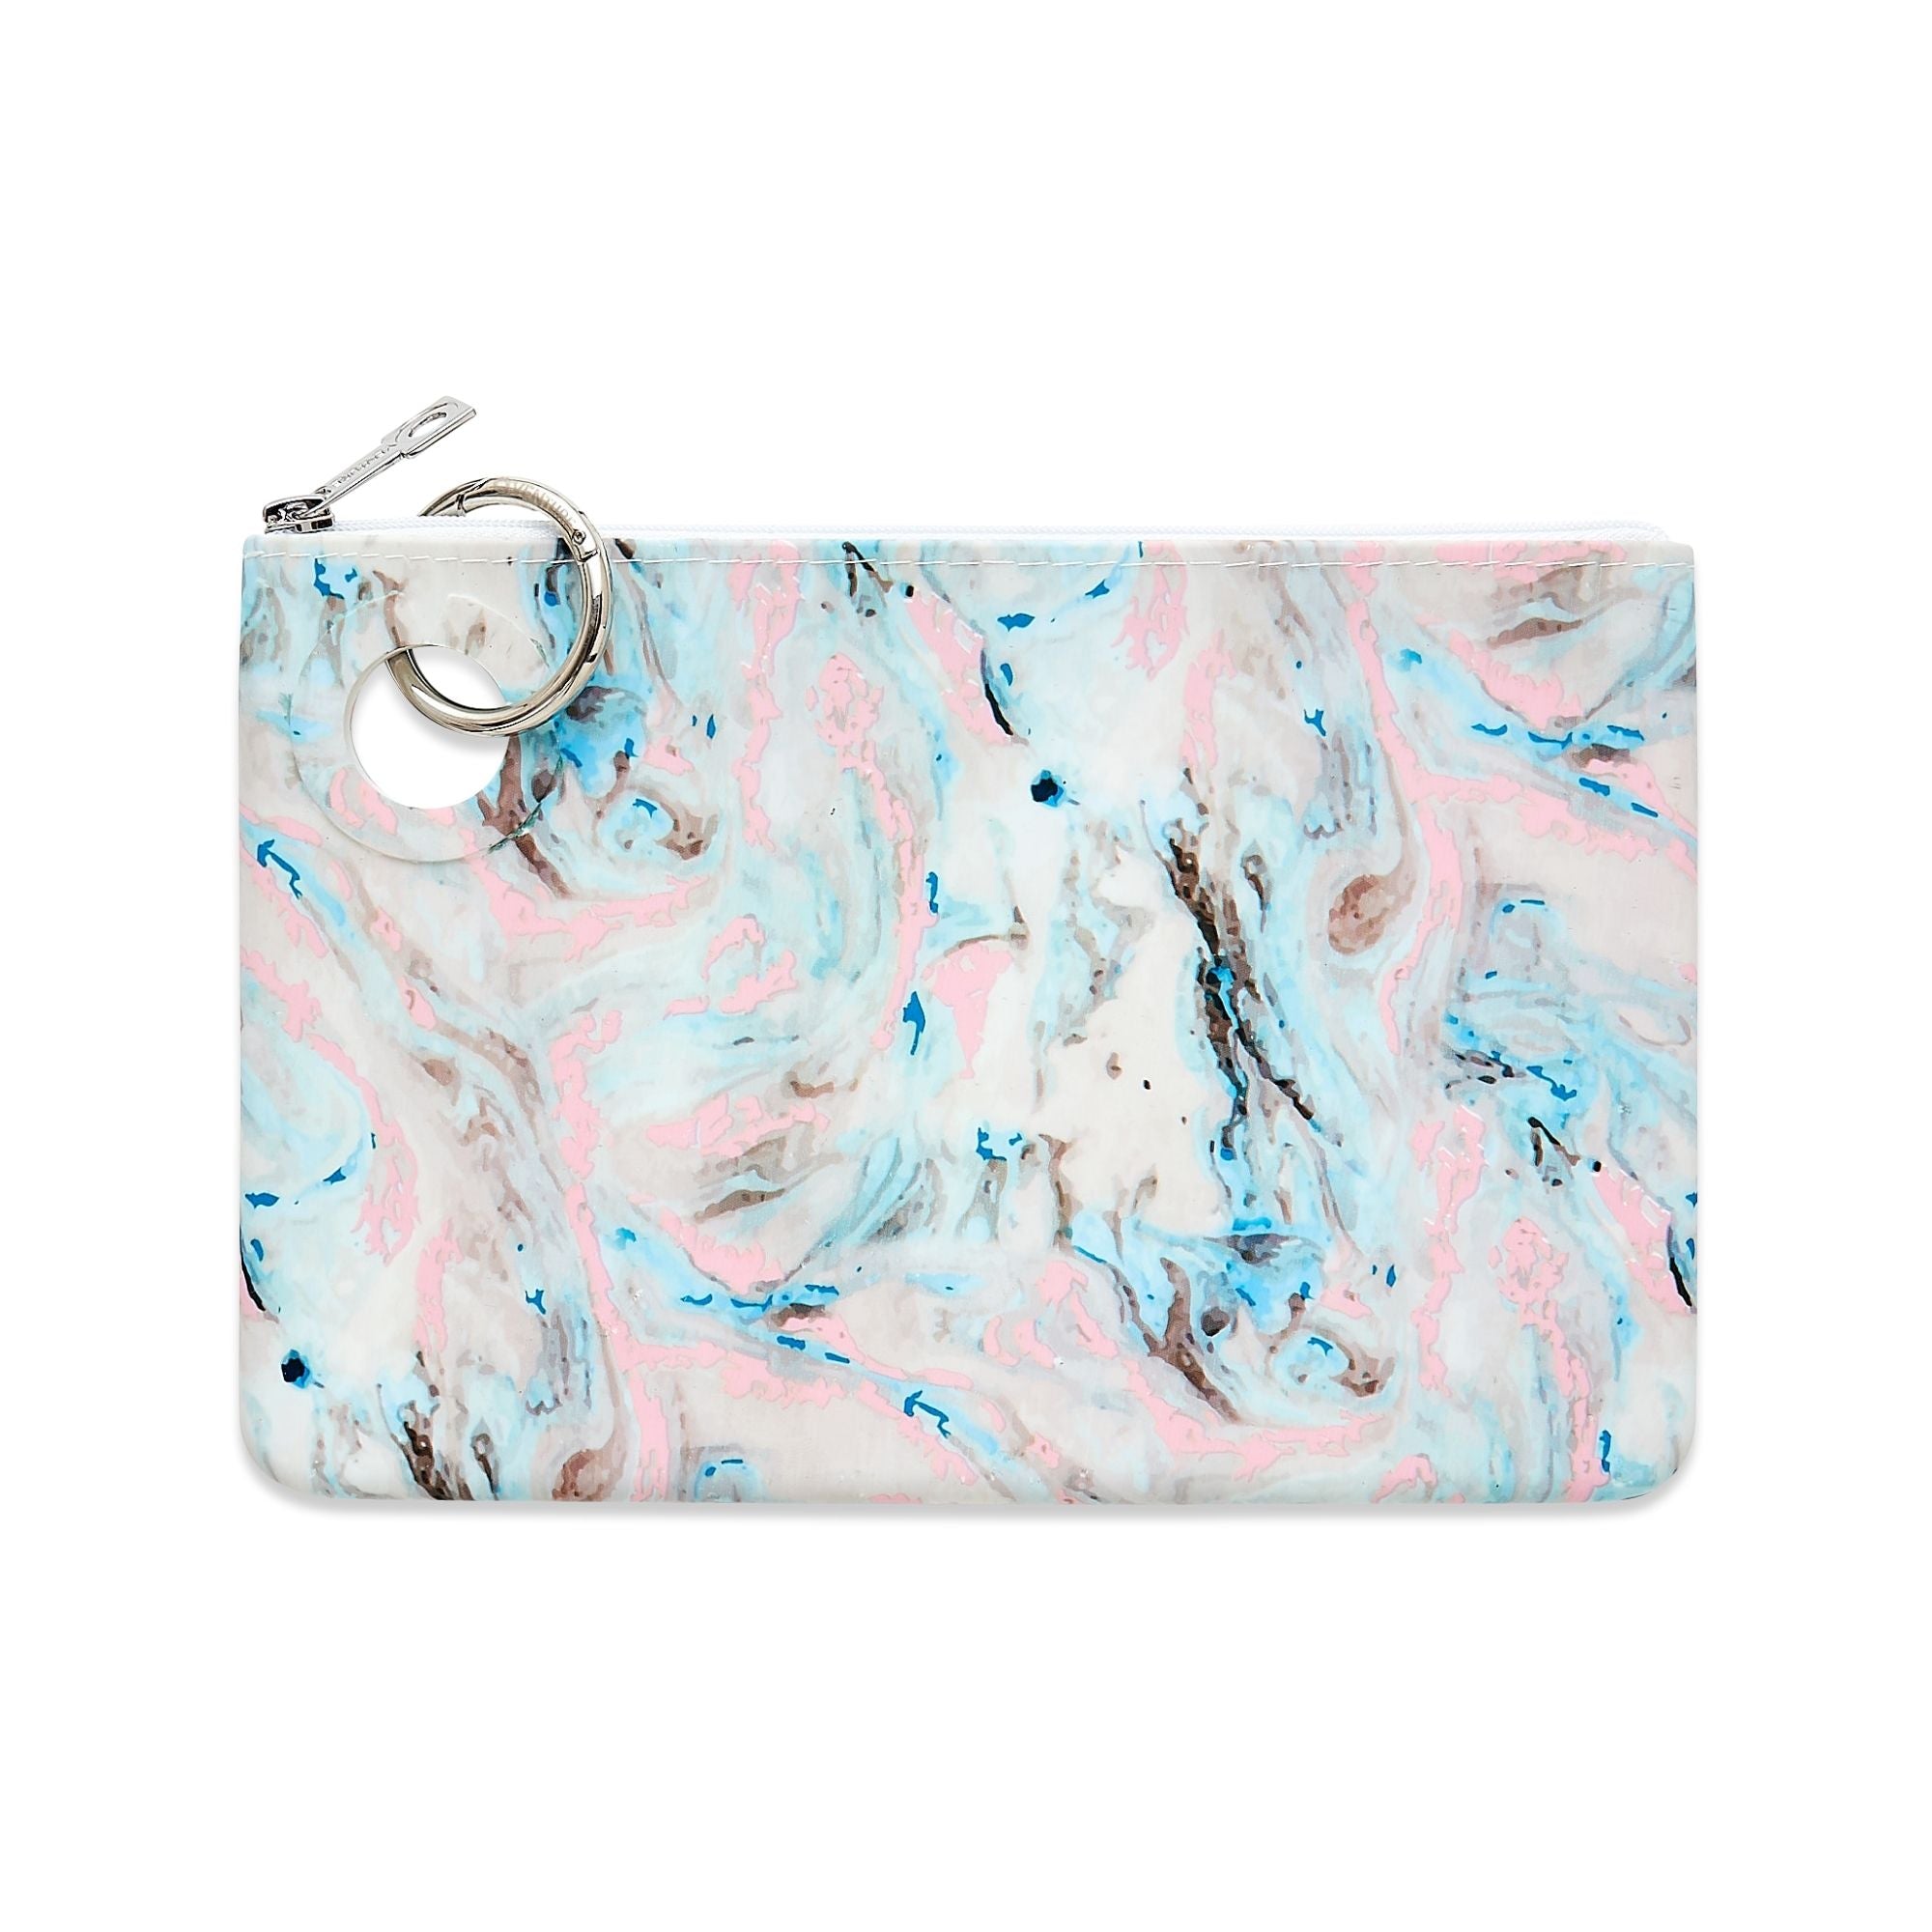 O-Venture - Large Silicone Pouch-Pastel Marble